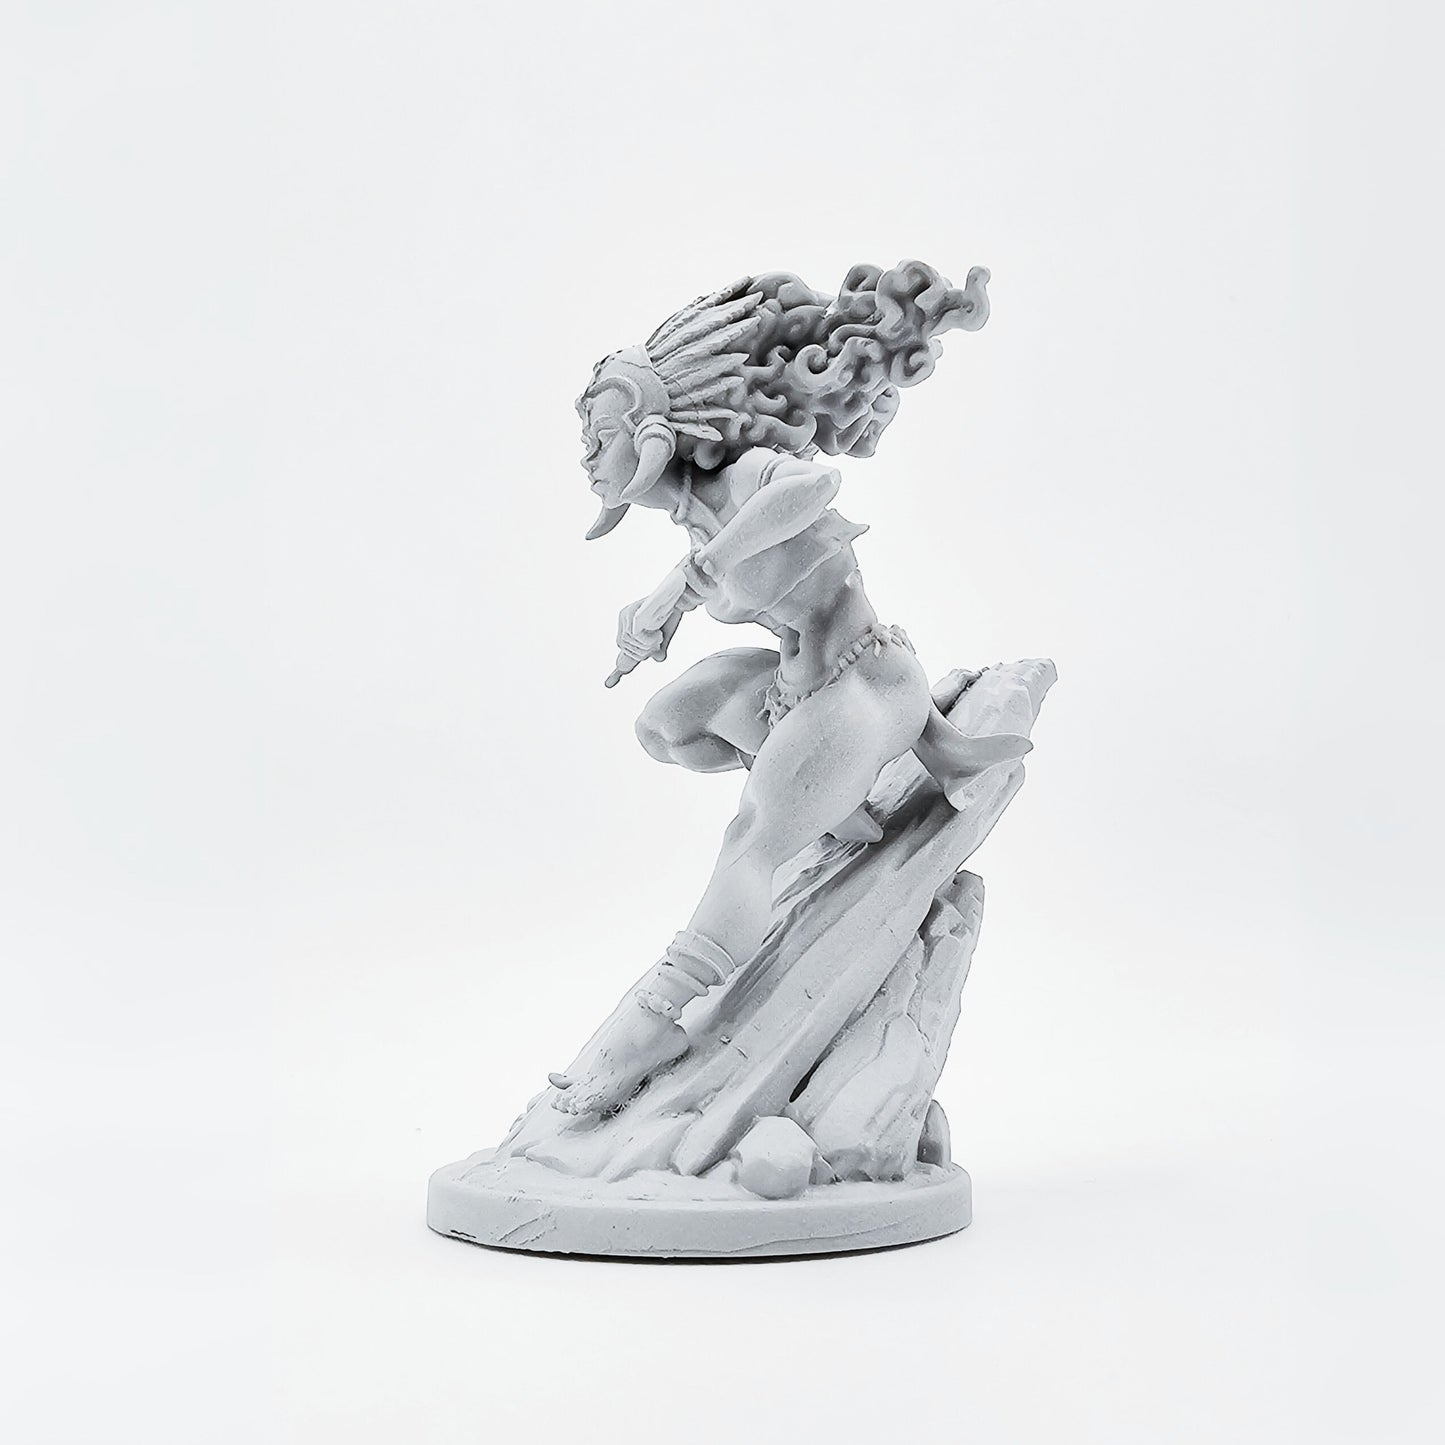 18+ Collector's 3D Printed Model: 60mm Resin model kits figure colorless and self-assembled.